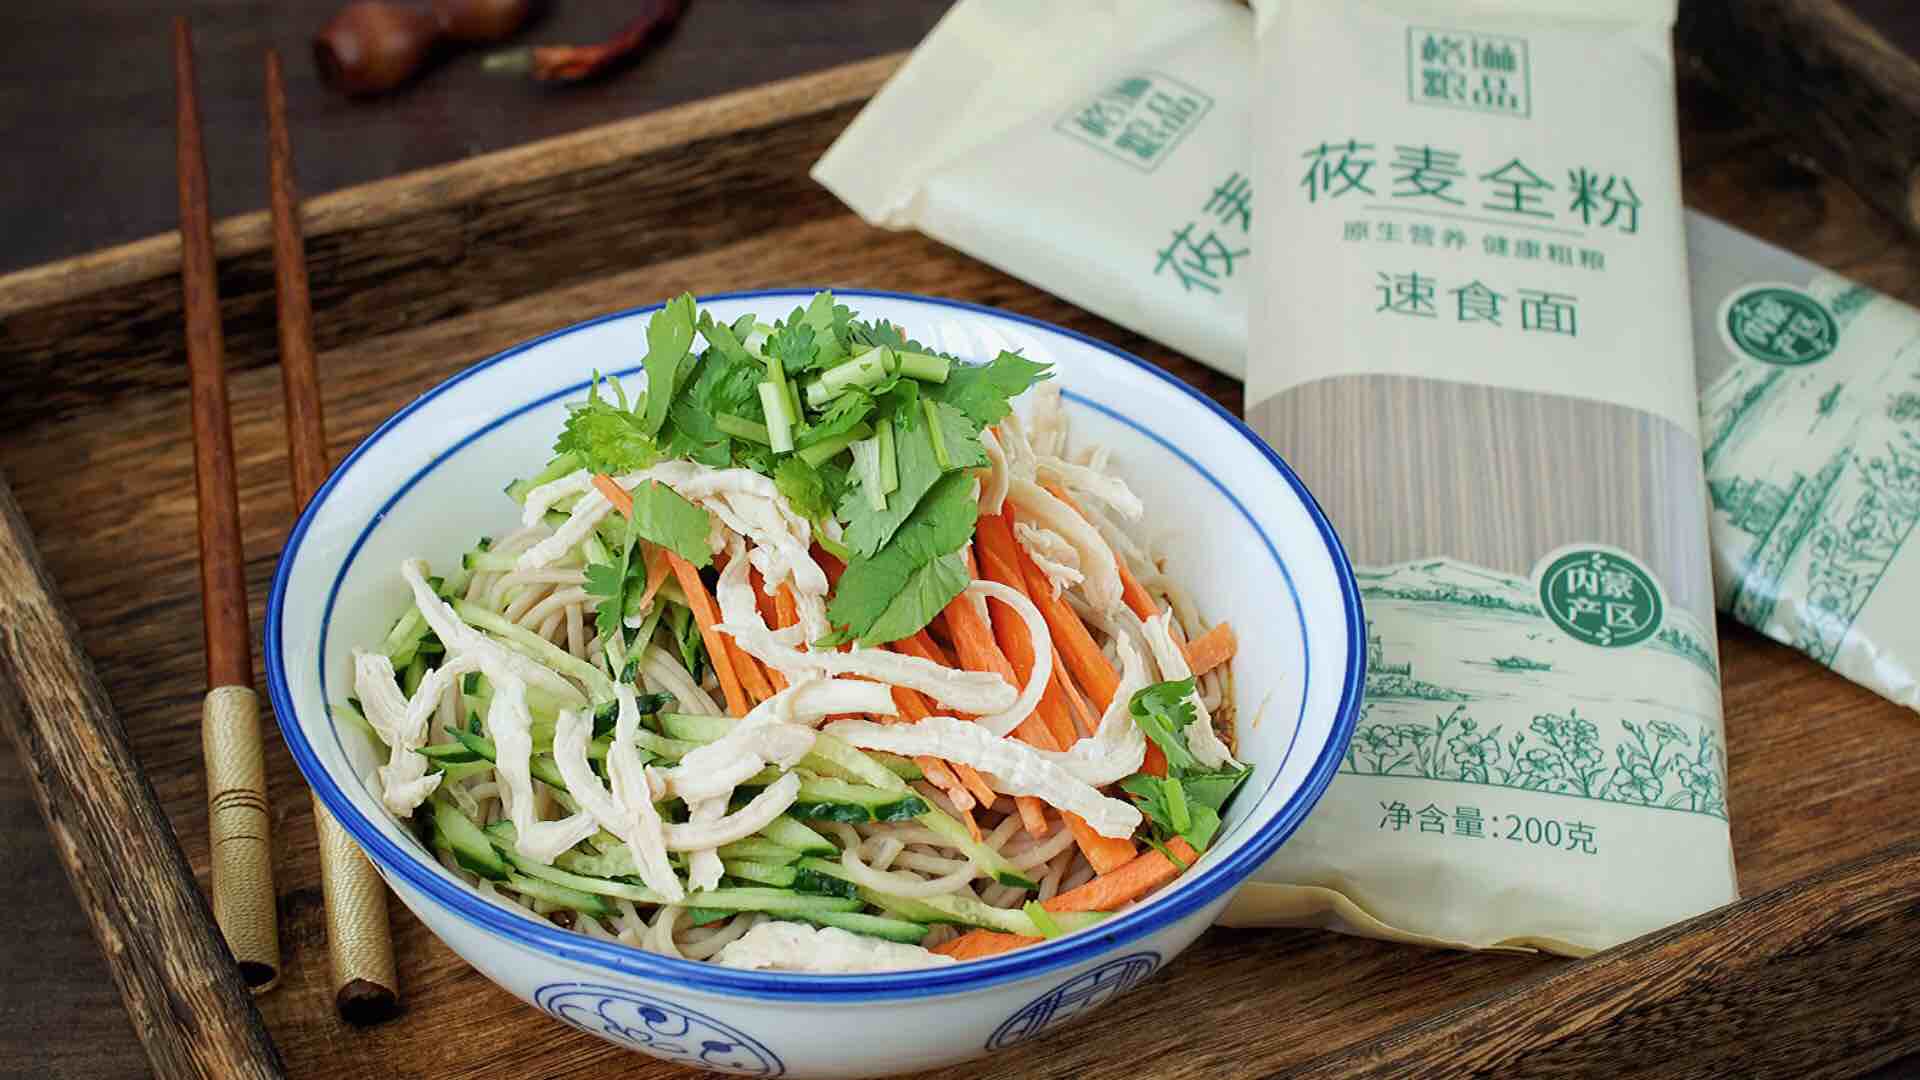 A Bowl of Noodles that are Delicious and Not Fat, It is Too Fragrant to Mix without Cooking!